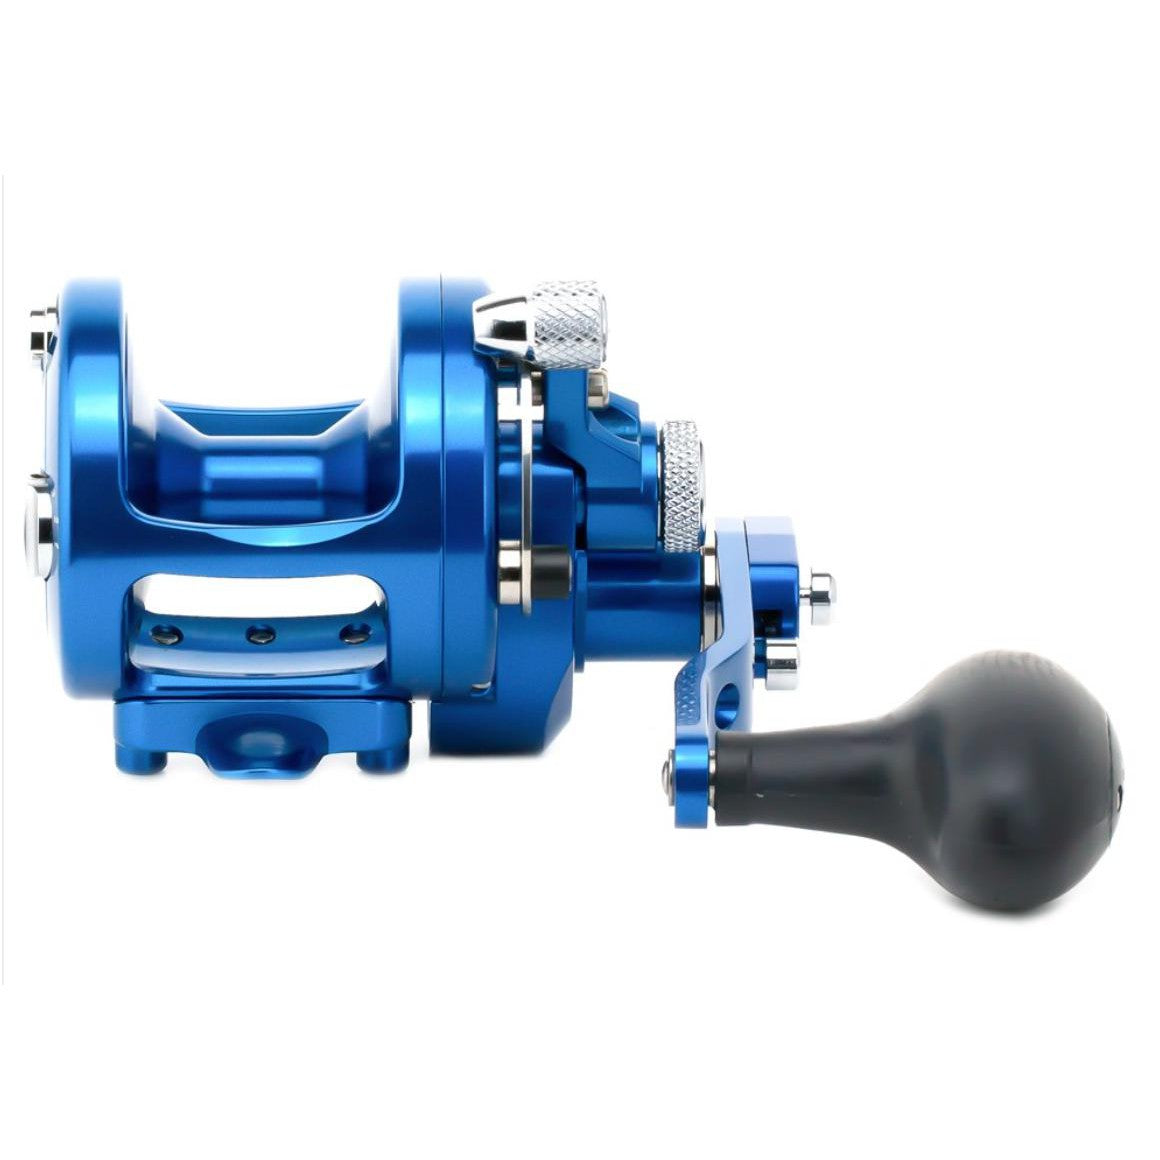 Saltwater/Sea Water Fishing Reel: Dual Use, Big Pulling, Durable, 230603  From Pong05, $24.14